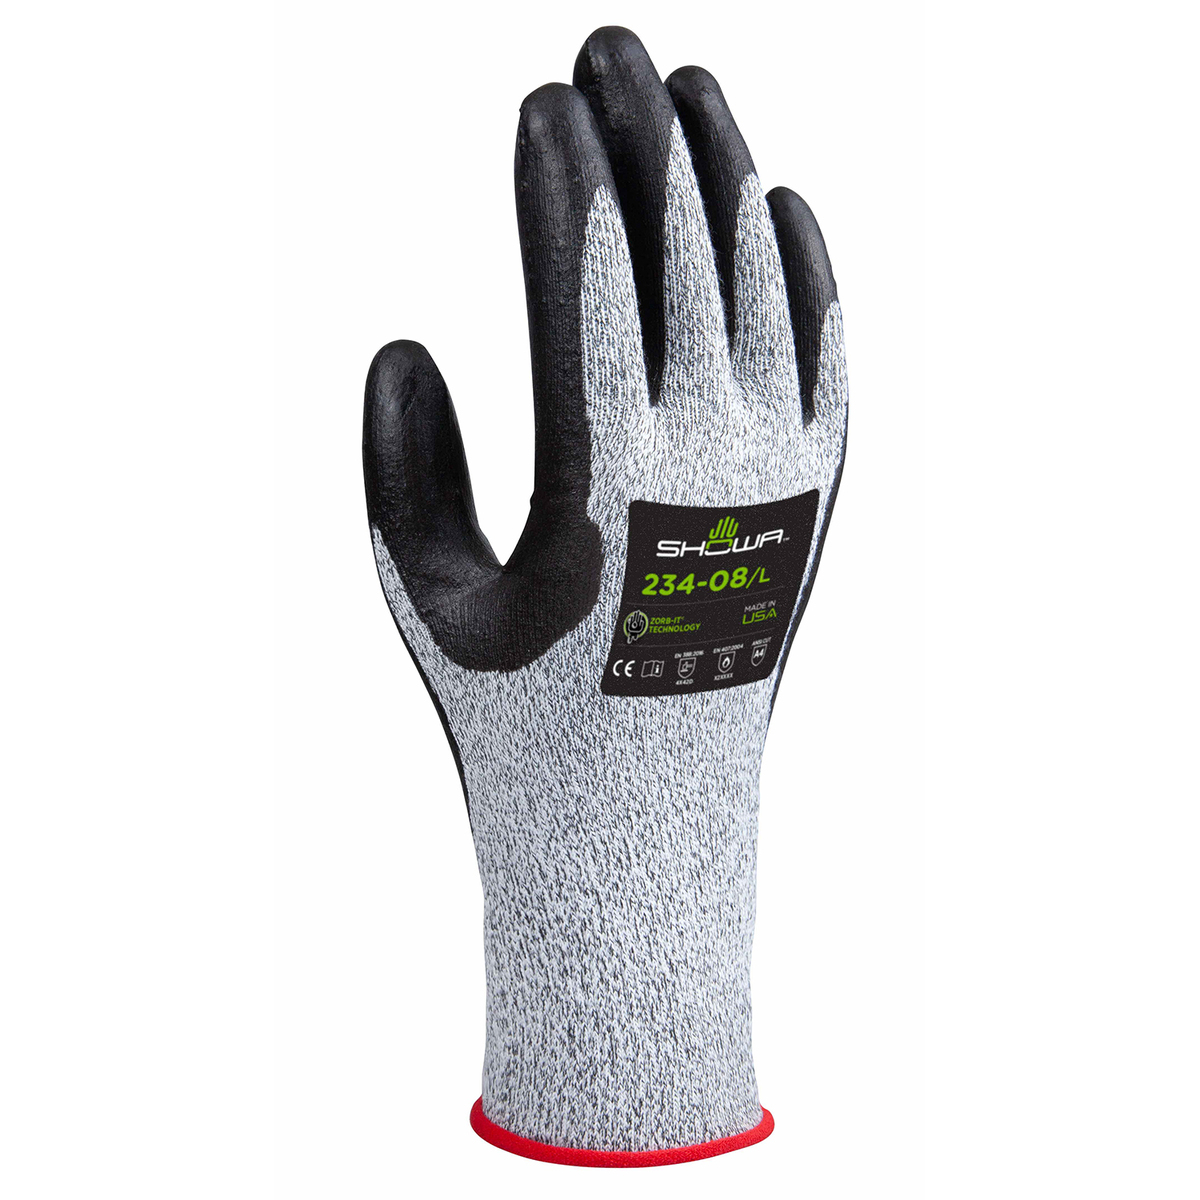 SHOWA® 10 Gauge Spandex And High Performance Polyethylene Cut Resistant Gloves With Foam Nitrile Coated Palm